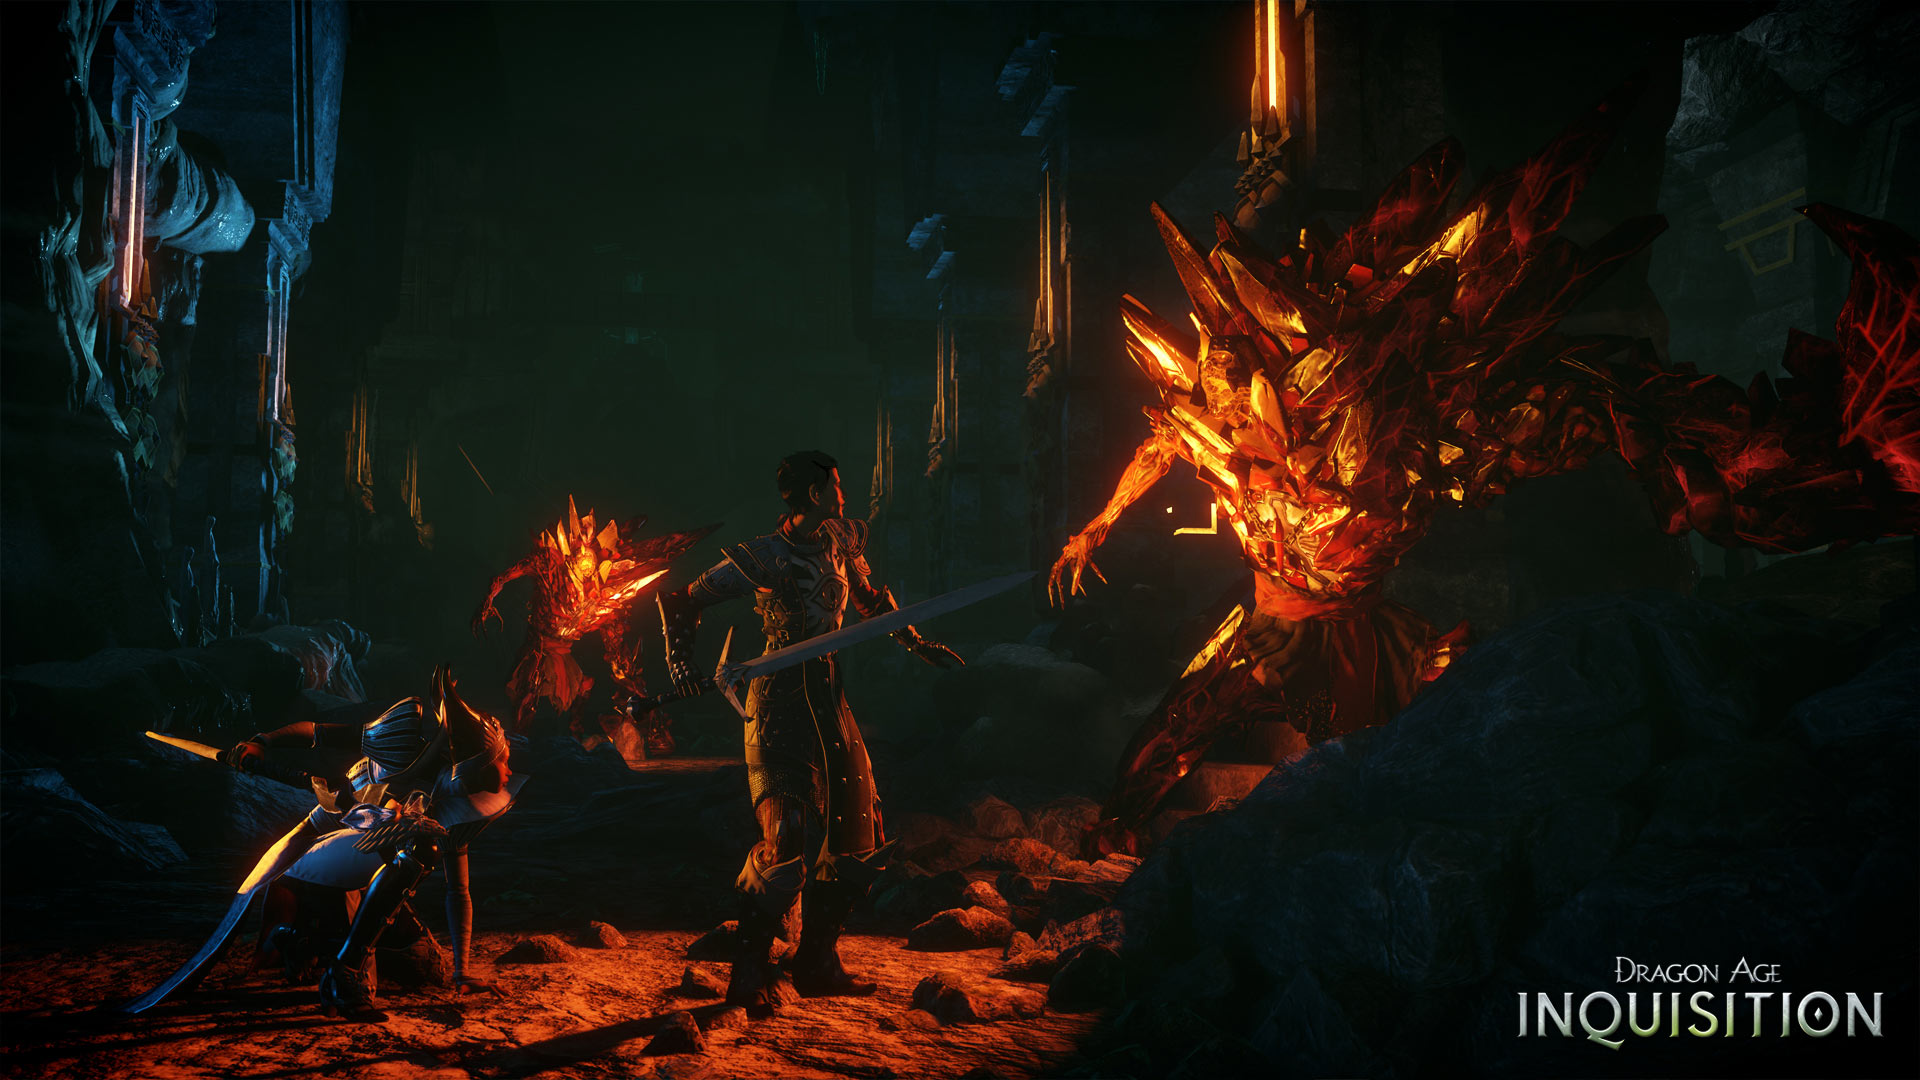 Bioware's Mike Laidlaw provides Dragon Age Inquisition pro tips for mount more